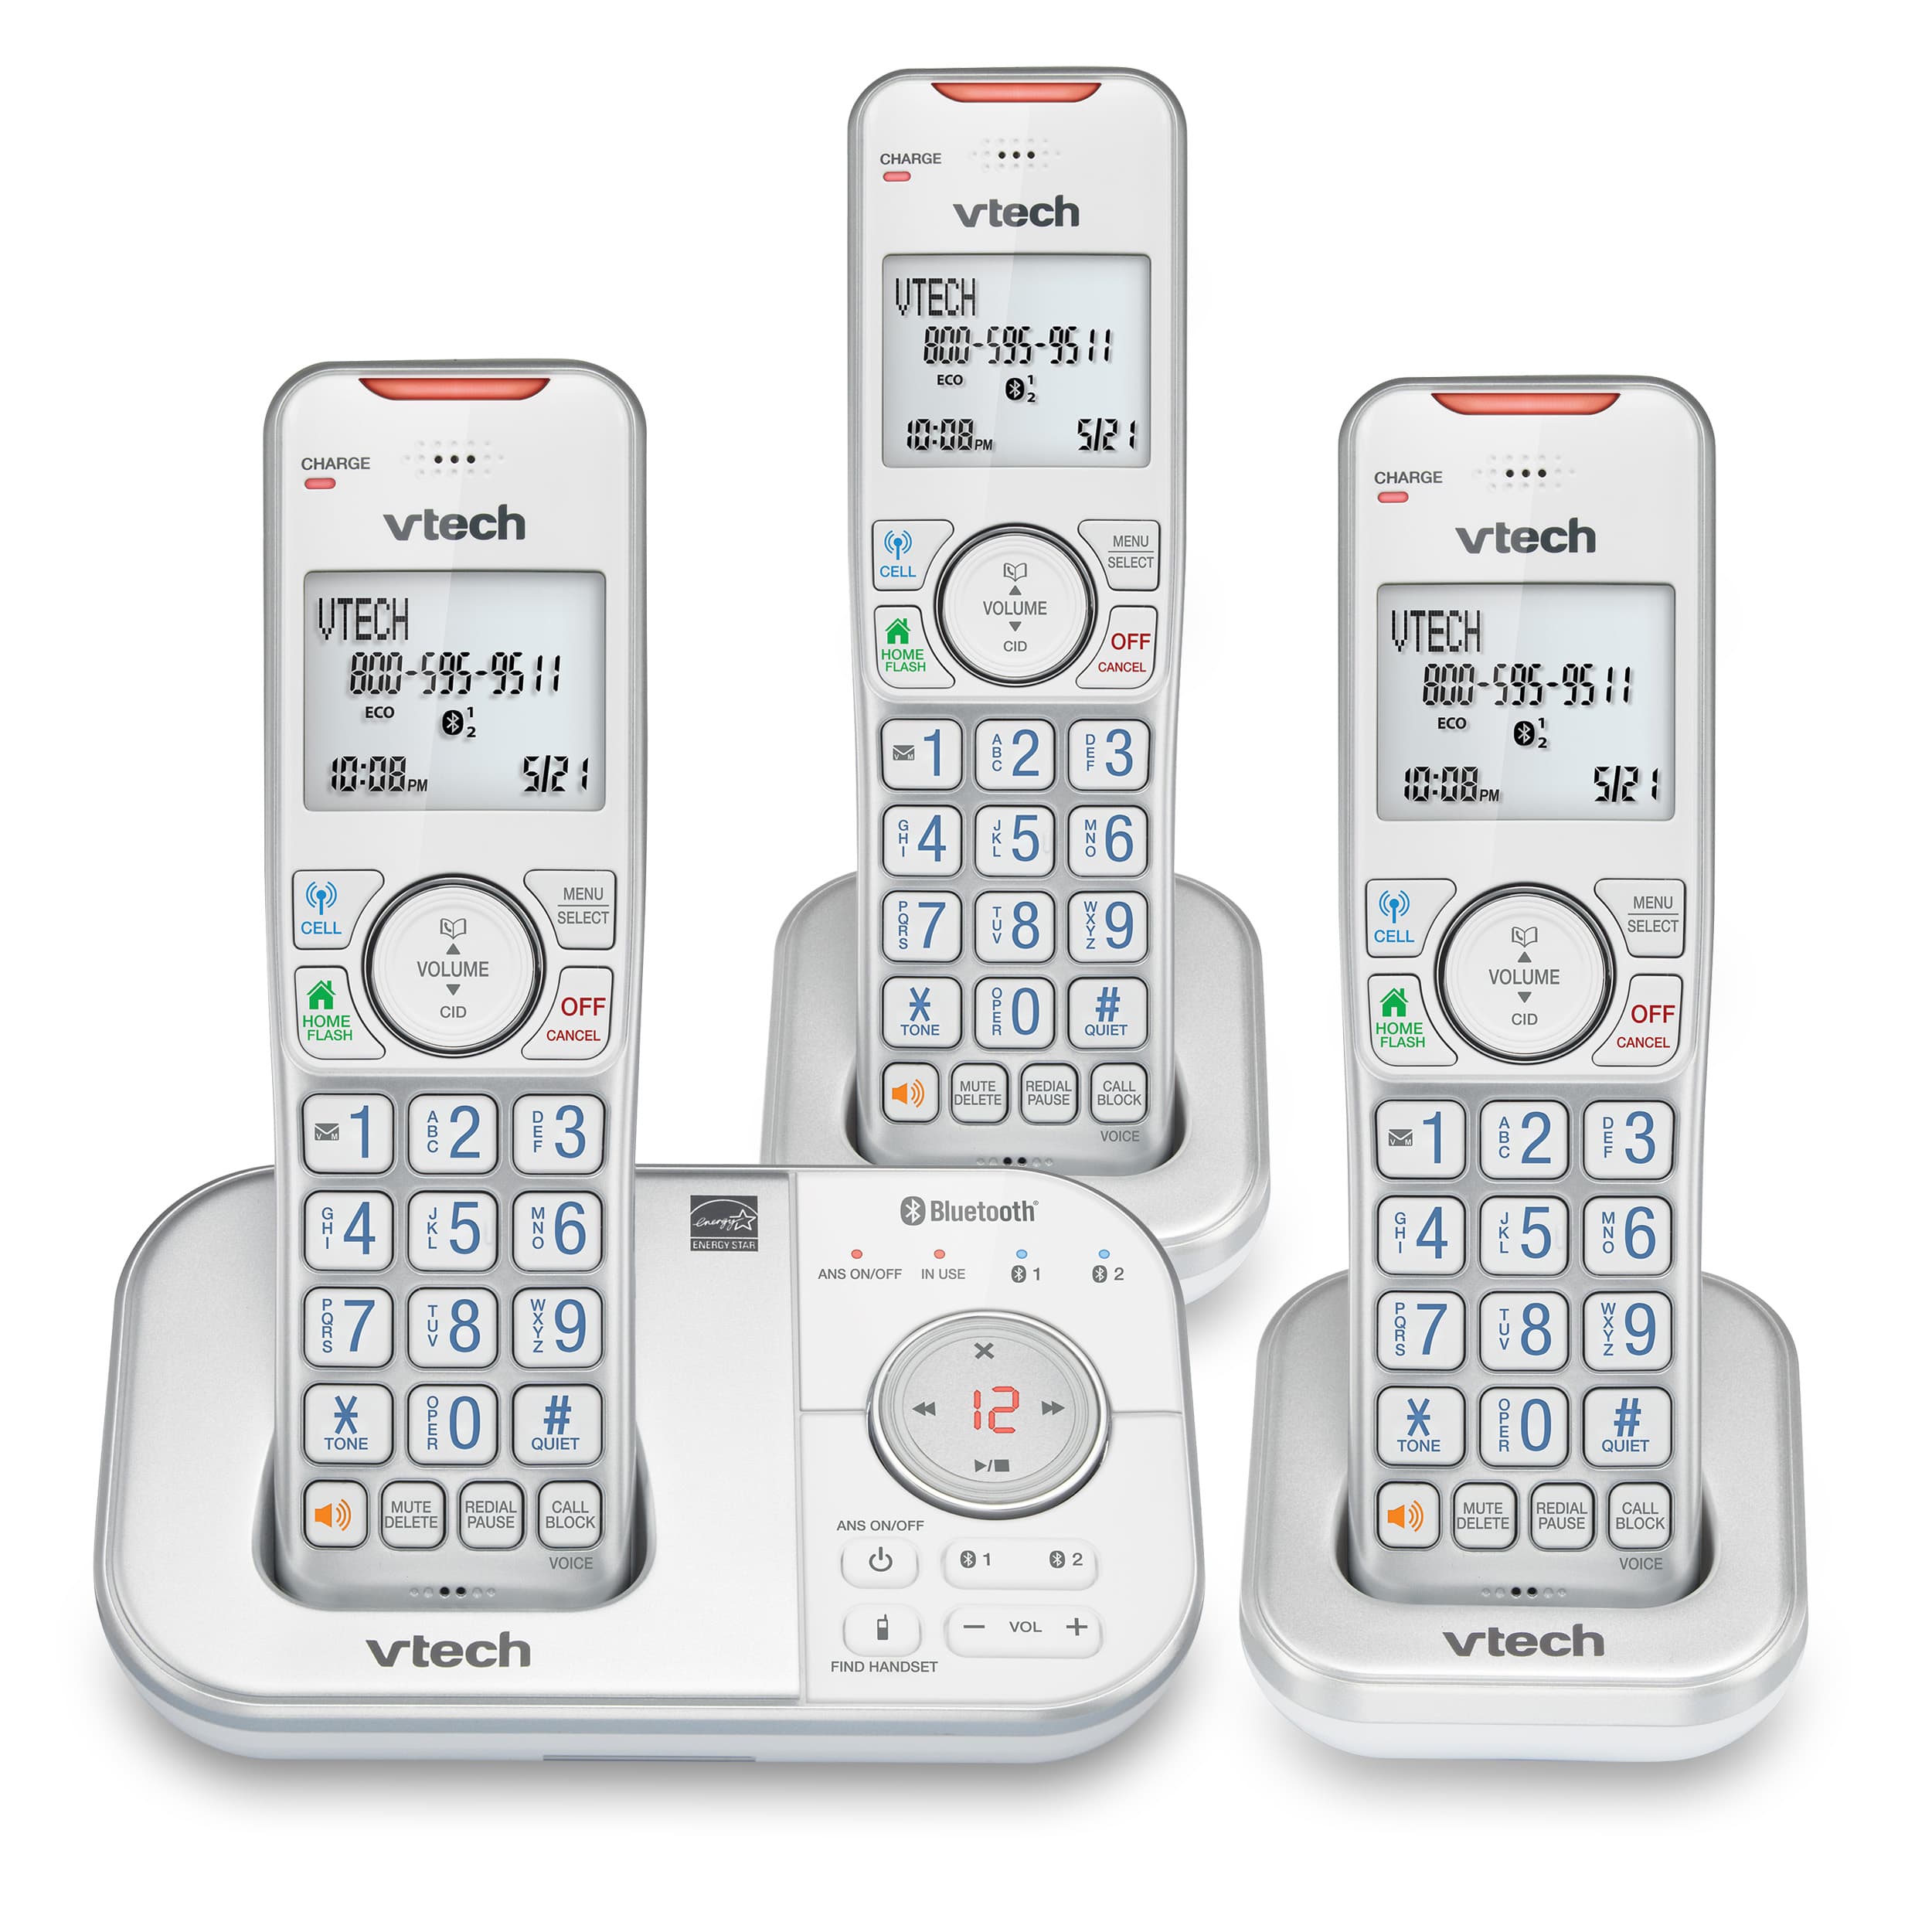 Silver & White Intercom and Connect to Cell Call Blocking Caller ID VTech VS112-27 DECT 6.0 Bluetooth 2 Handset Cordless Phone for Home with Answering Machine 